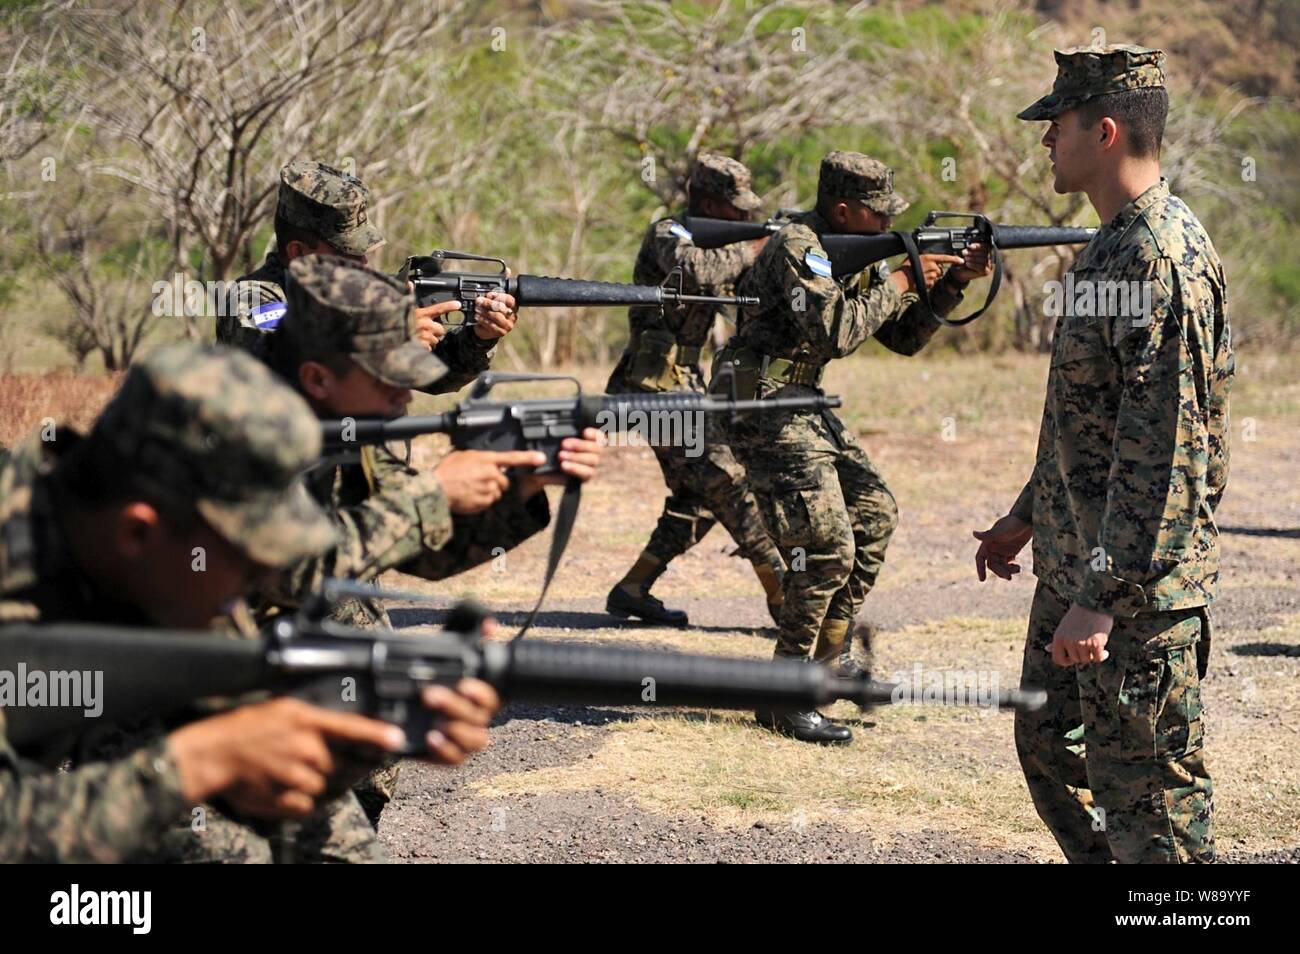 U.S. Marine Corps Staff Sgt. Daniel Monteiro (right), assigned to Marine Corps Training and Advisory Group, teaches proper tactical movement techniques to a group of soldiers assigned to 11th Honduran army battalion during a week-long subject matter expert exchange in support of Southern Partnership Station 2011 in San Lorenzo, Honduras, on March 15, 2011.  Southern Partnership Station is an annual deployment of U.S. ships to the U.S. Southern Command's area of responsibility in the Caribbean and Latin America.  The exercise involves information sharing with navies, coast guards and civilian s Stock Photo